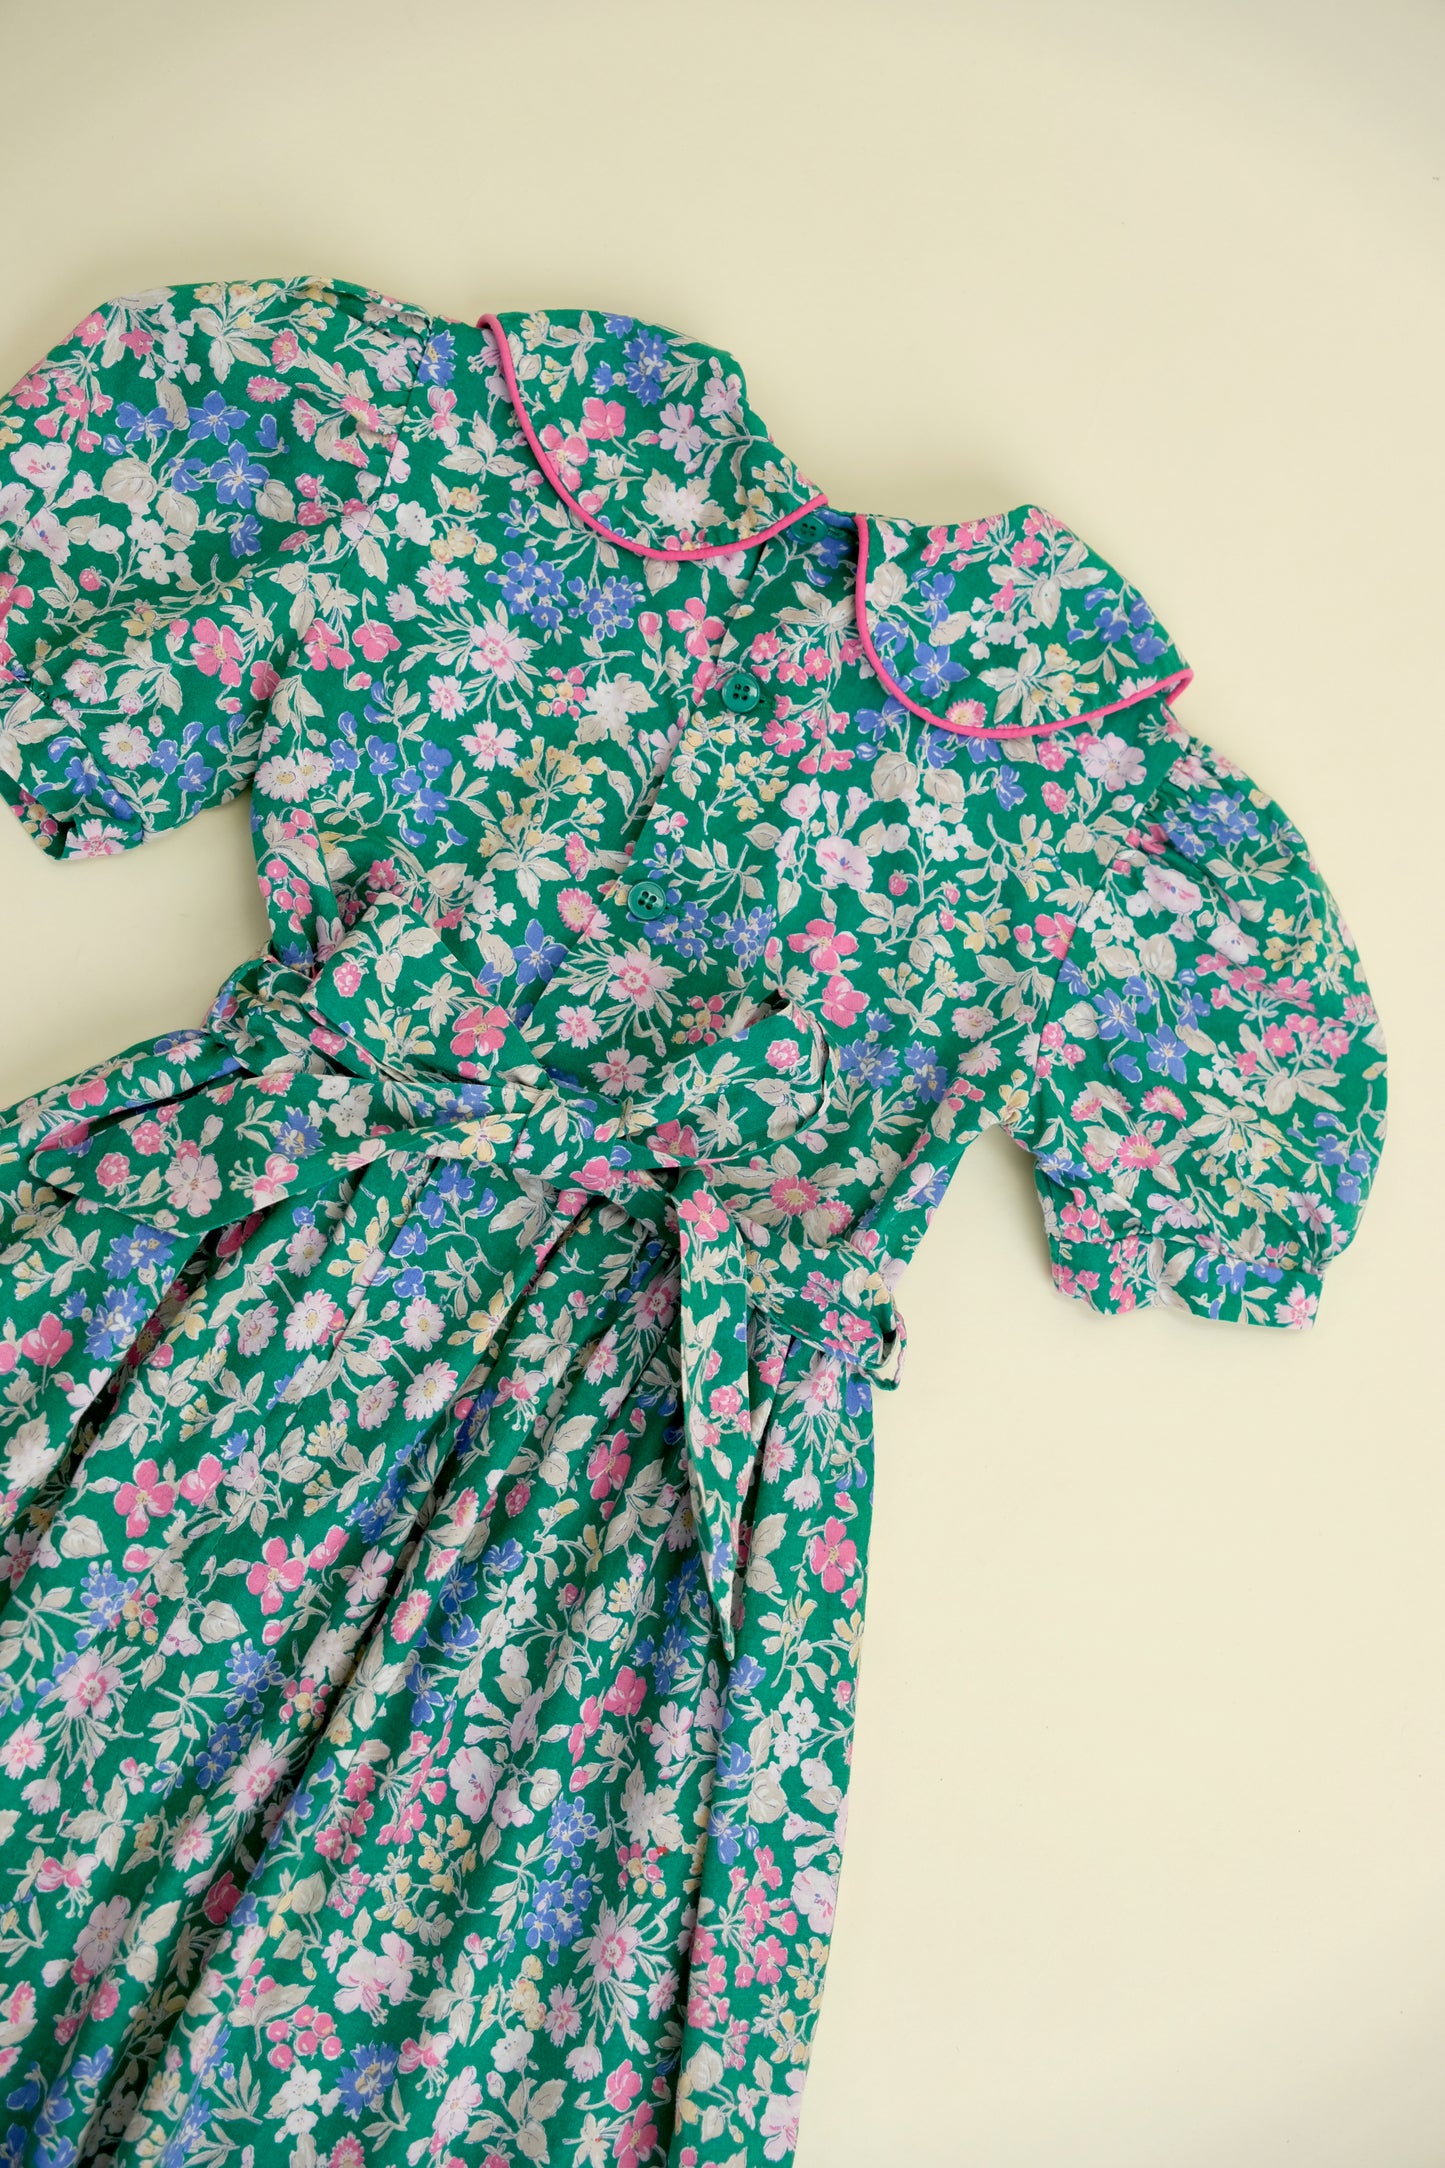 French Floral Dress - Size 4 Years